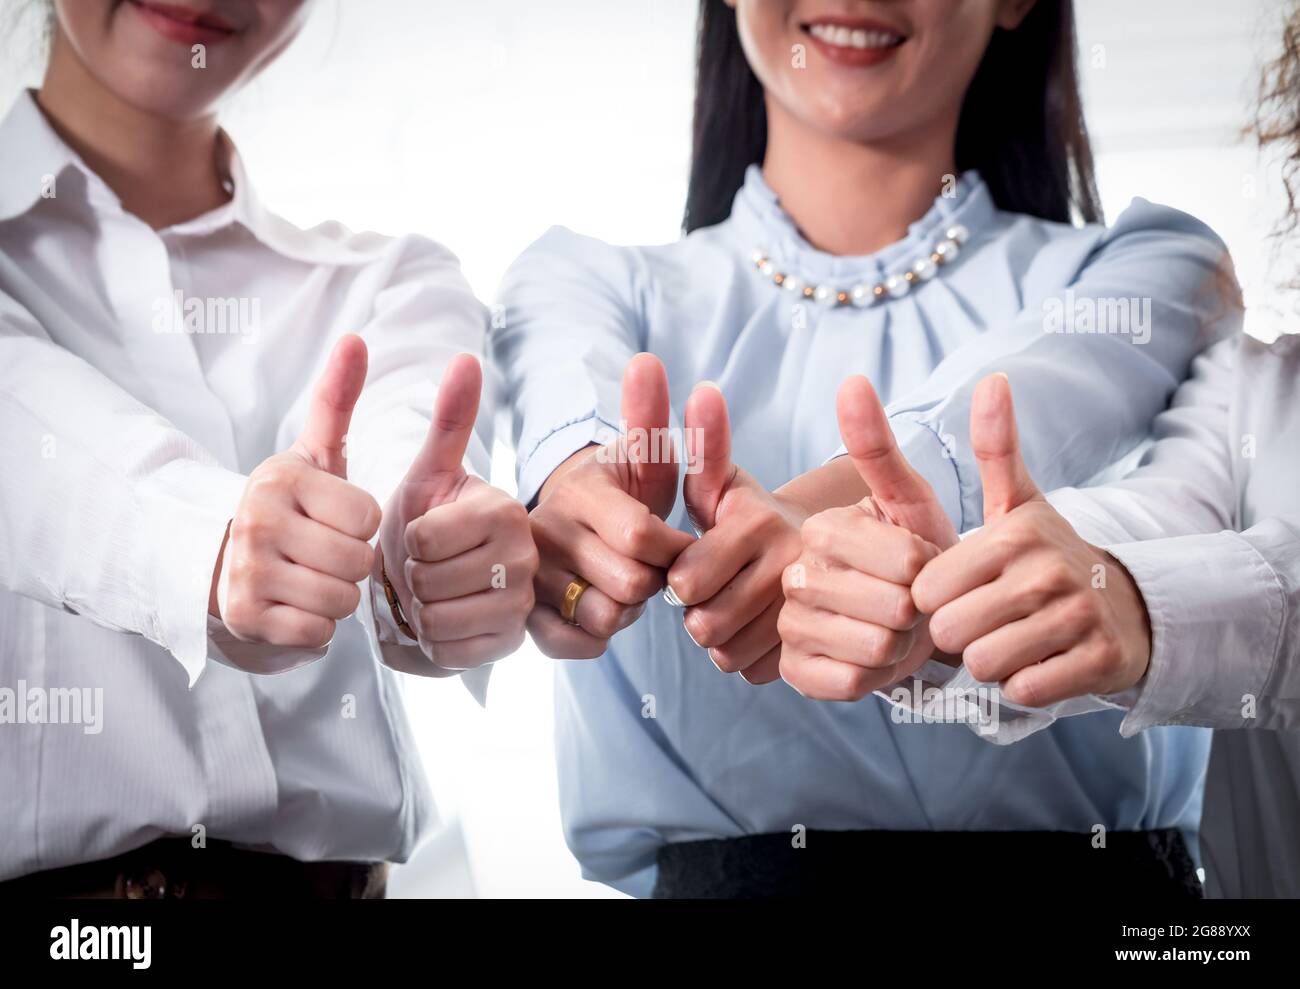 Three businesswoman partners show the gesture of thumps up in the modern office. Team Work Business Concept Stock Photo